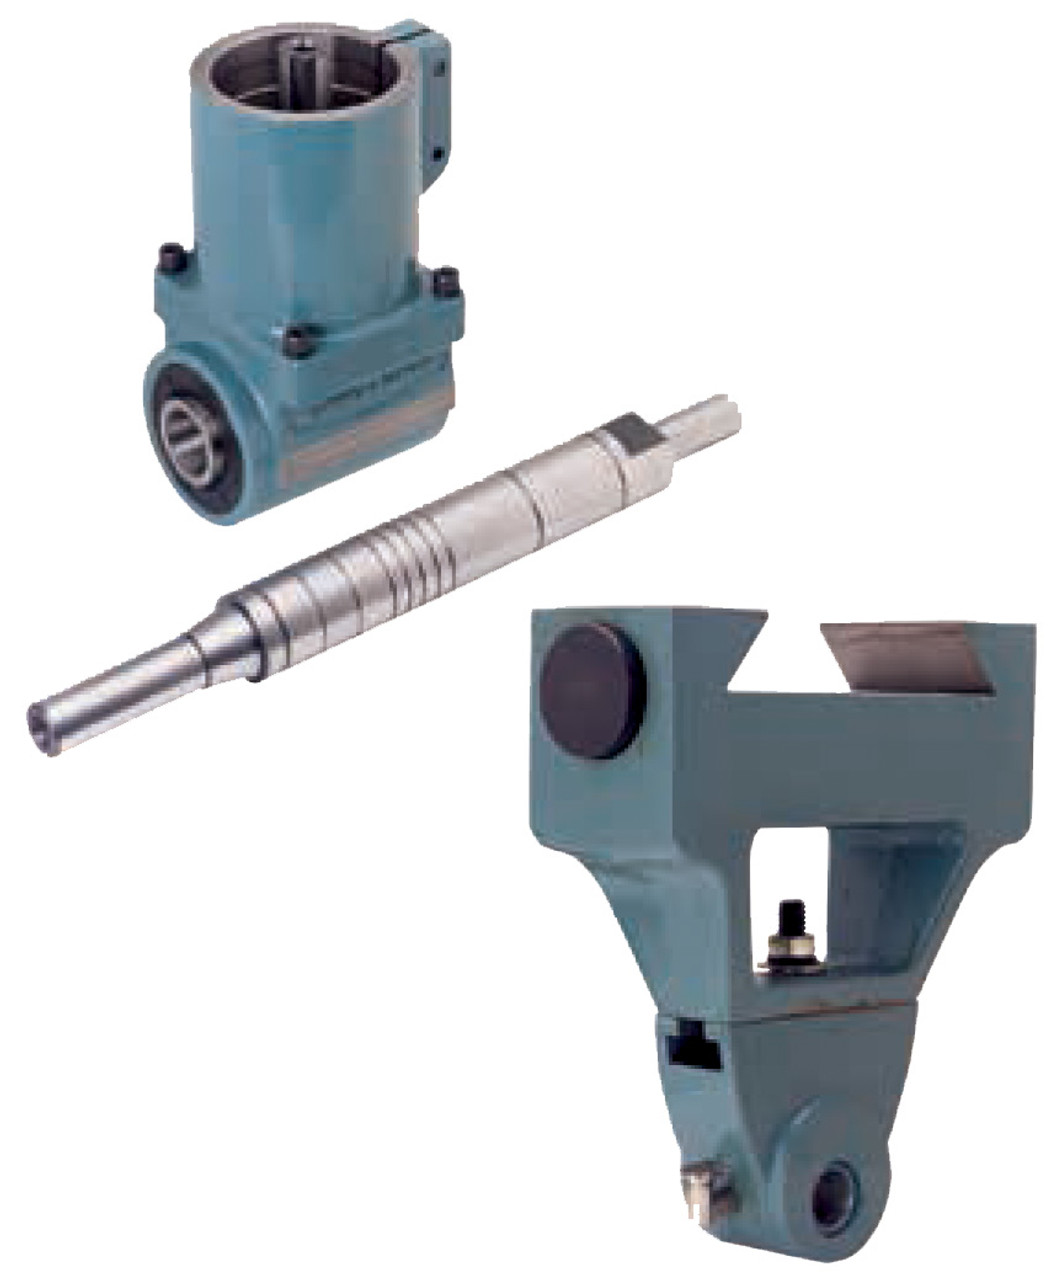 Milling Right-Angle Attachment  Lagun Engineering┃Quality Manual